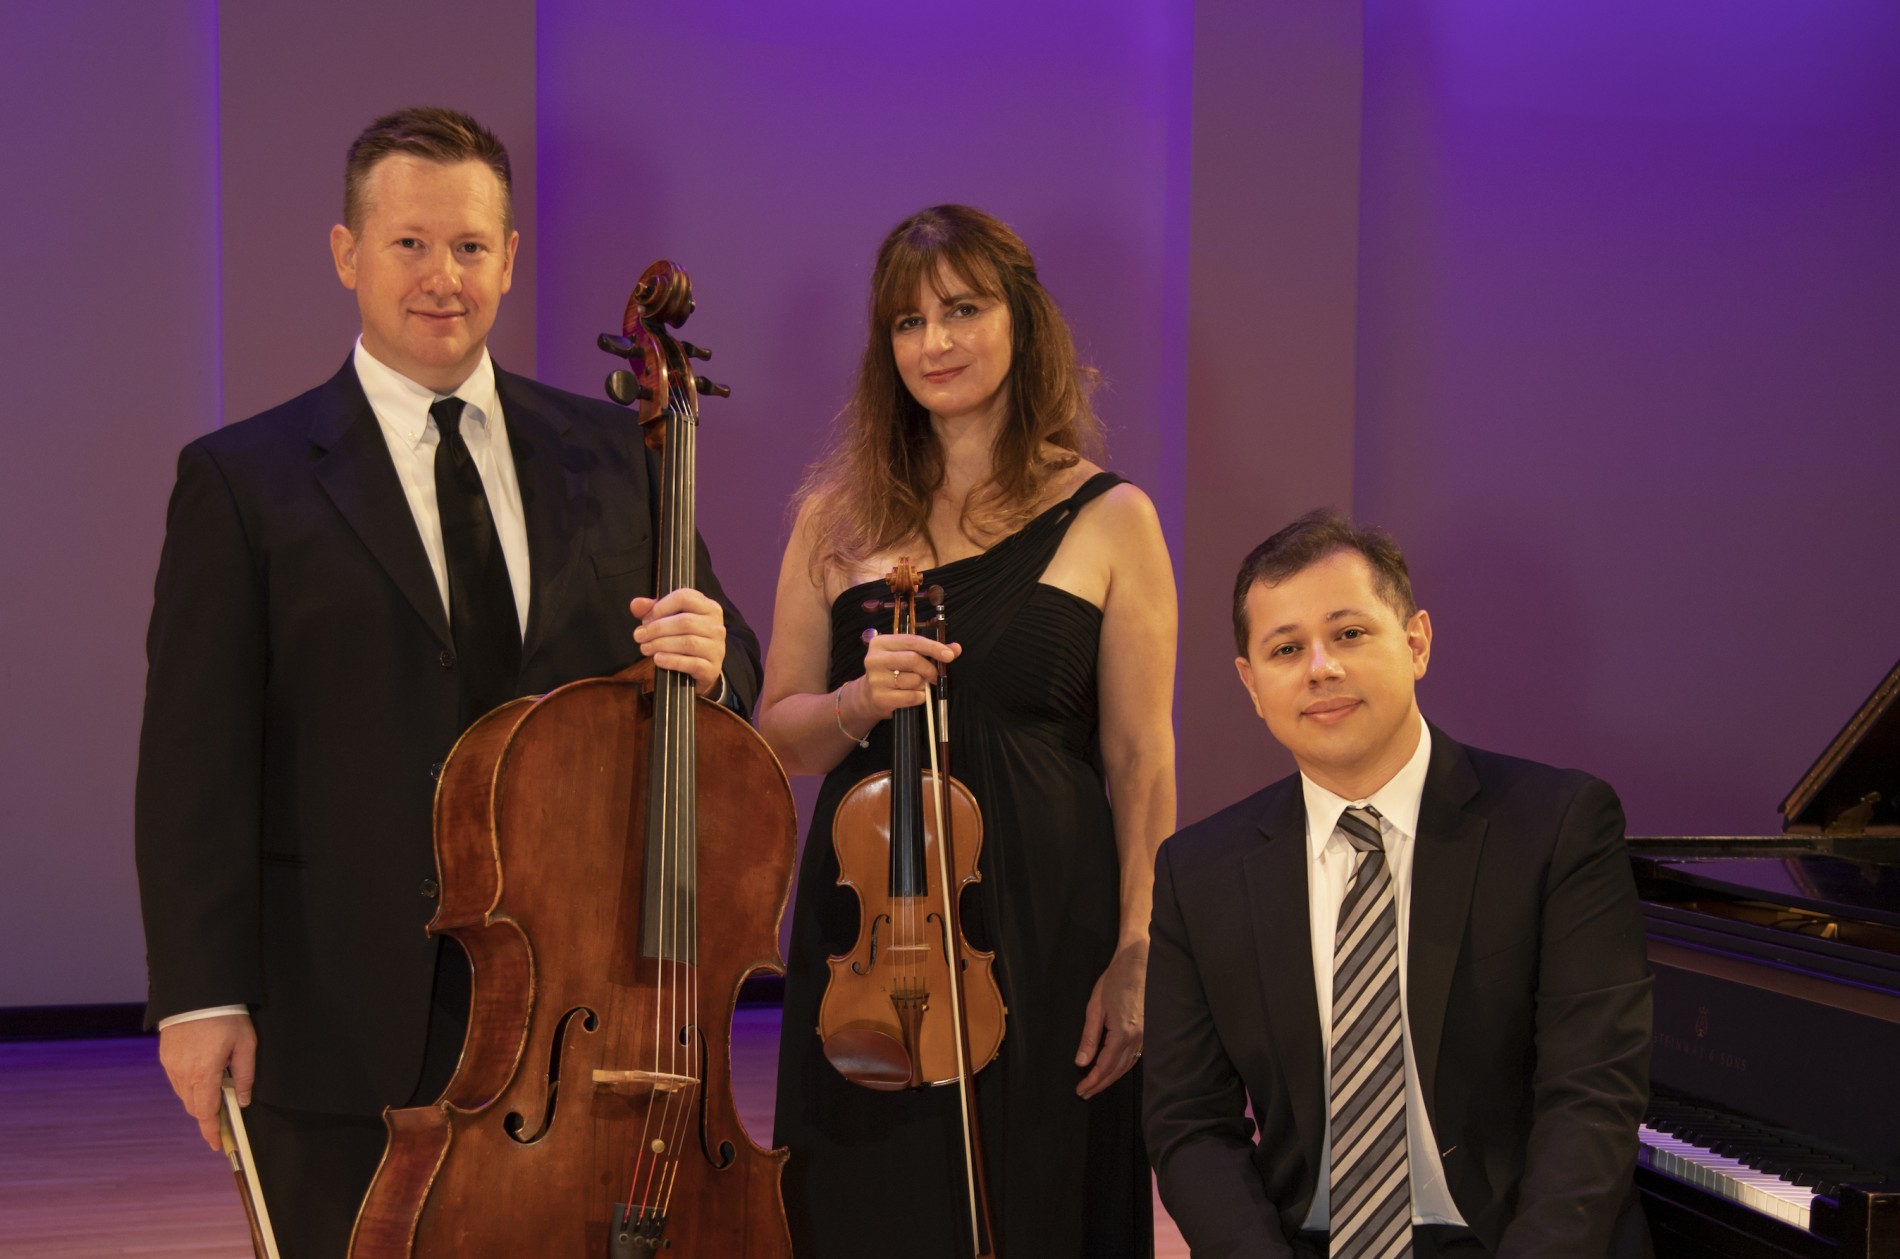 A formal portrait of a standing cellist, violinist, and pianist next to a piano.